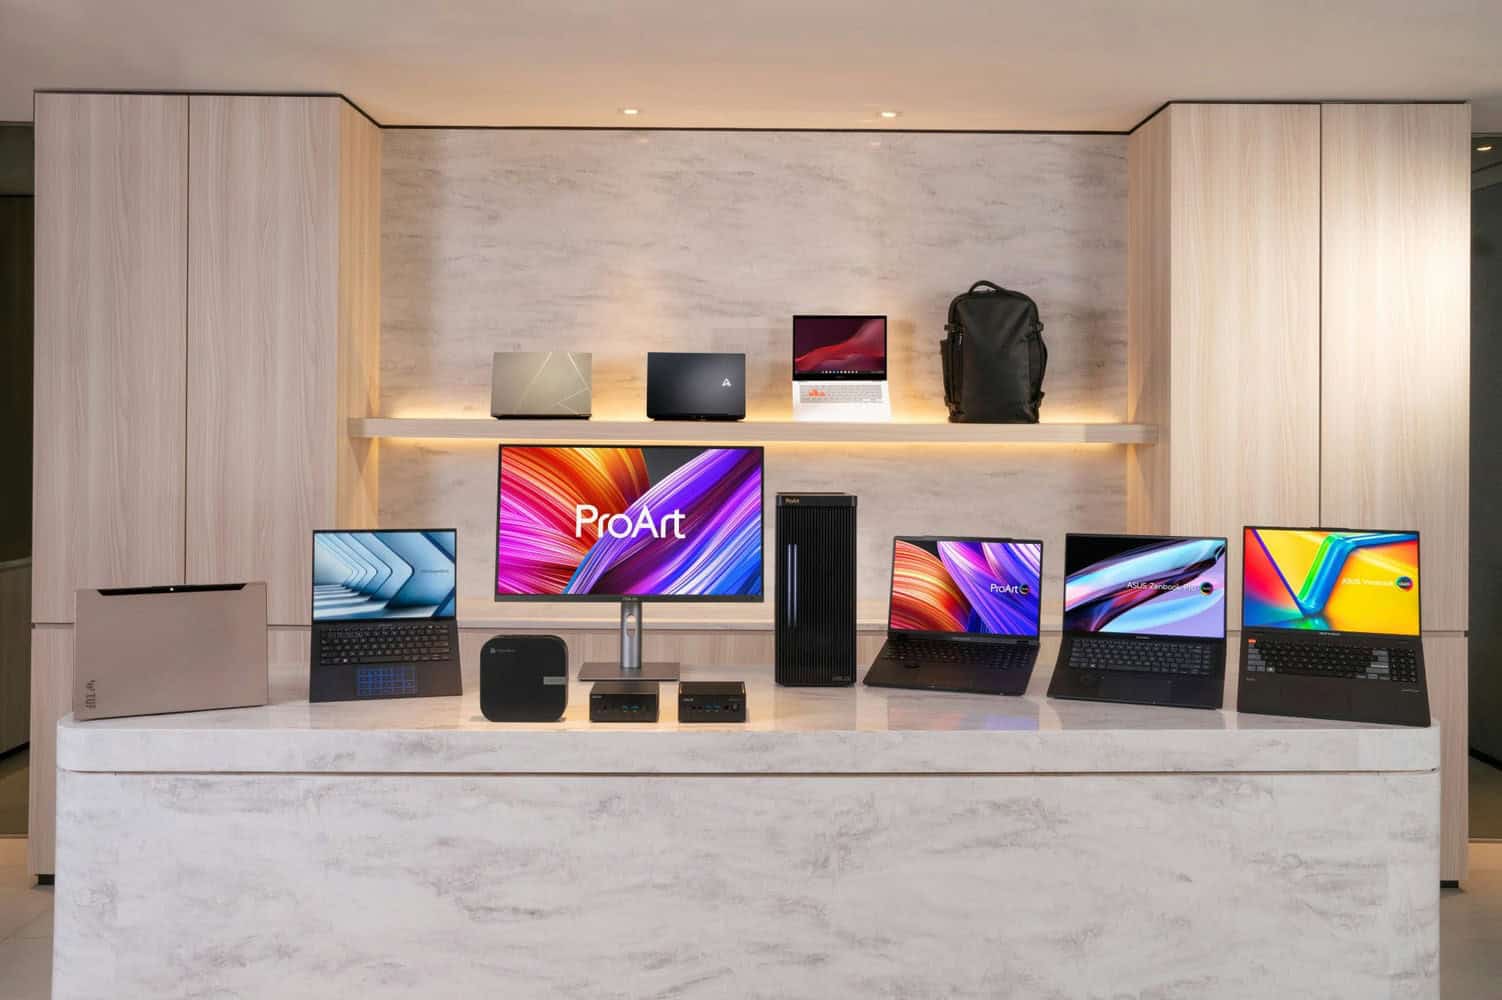 ASUS Presents Seeing An Incredible Future at CES 2023 on stage innovations